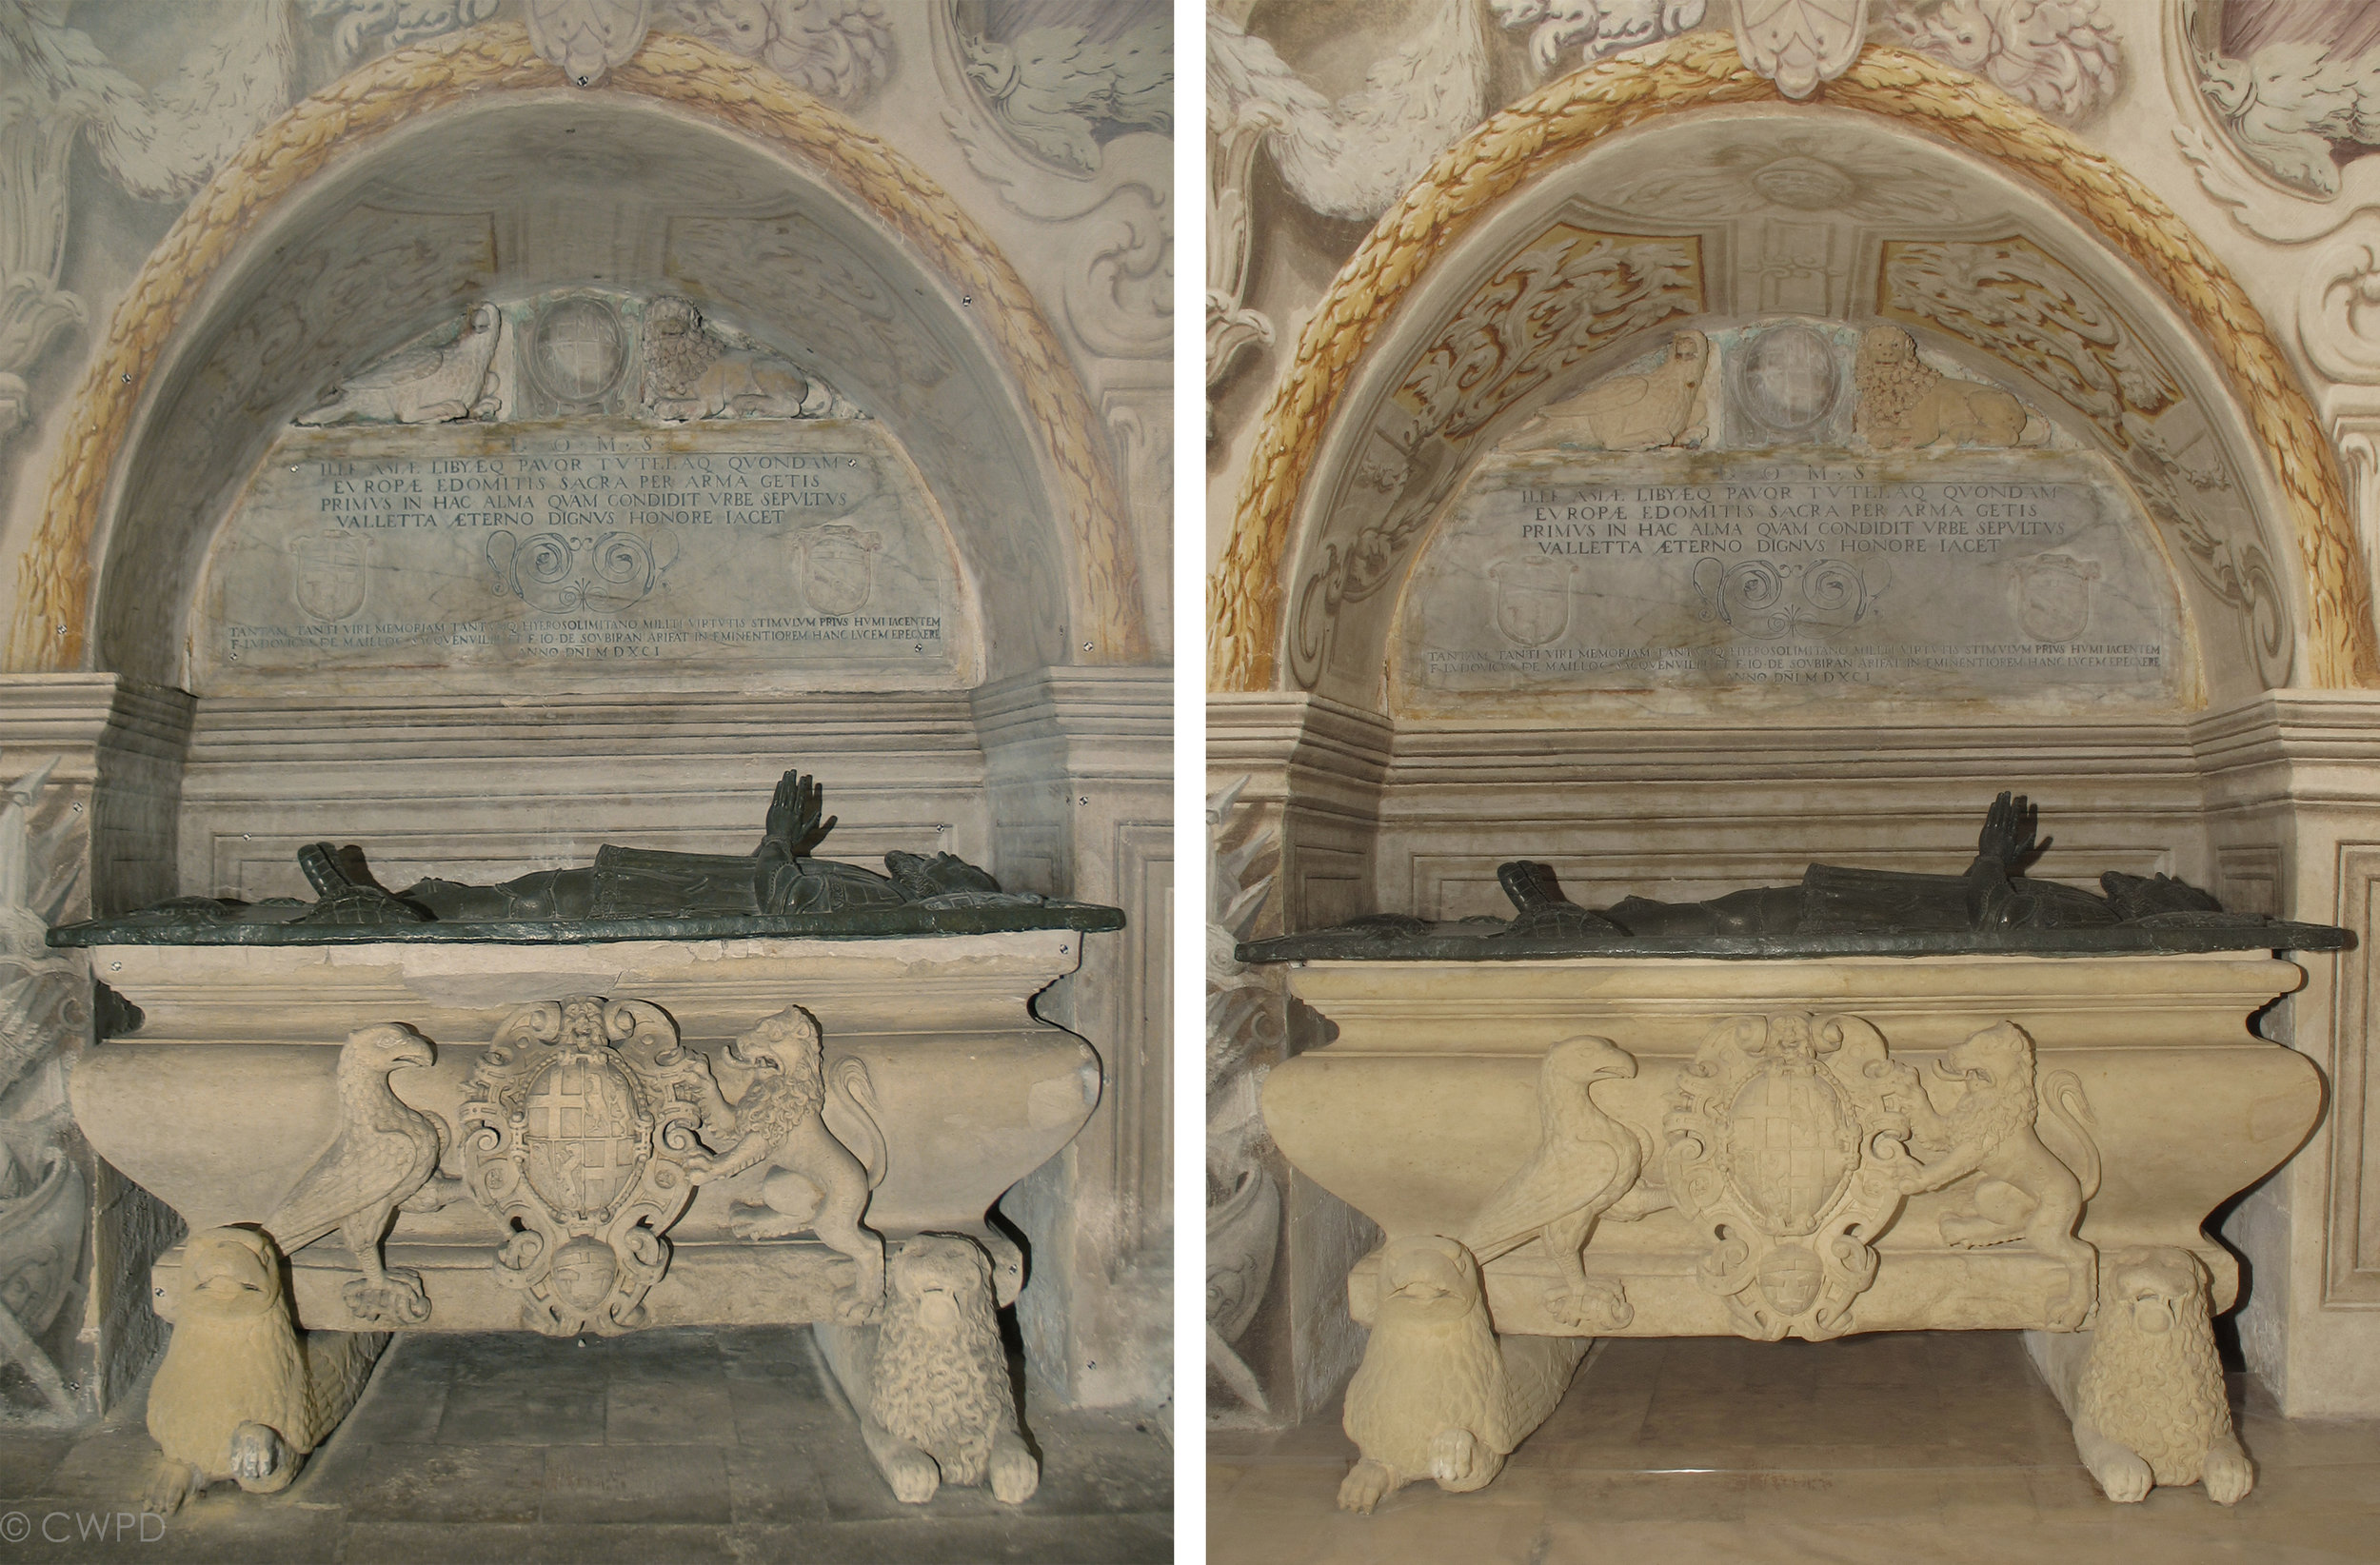  Detail of the Crypt before (left) and after (right) conservation treatment.&nbsp;  Image © Courtauld CWPD 